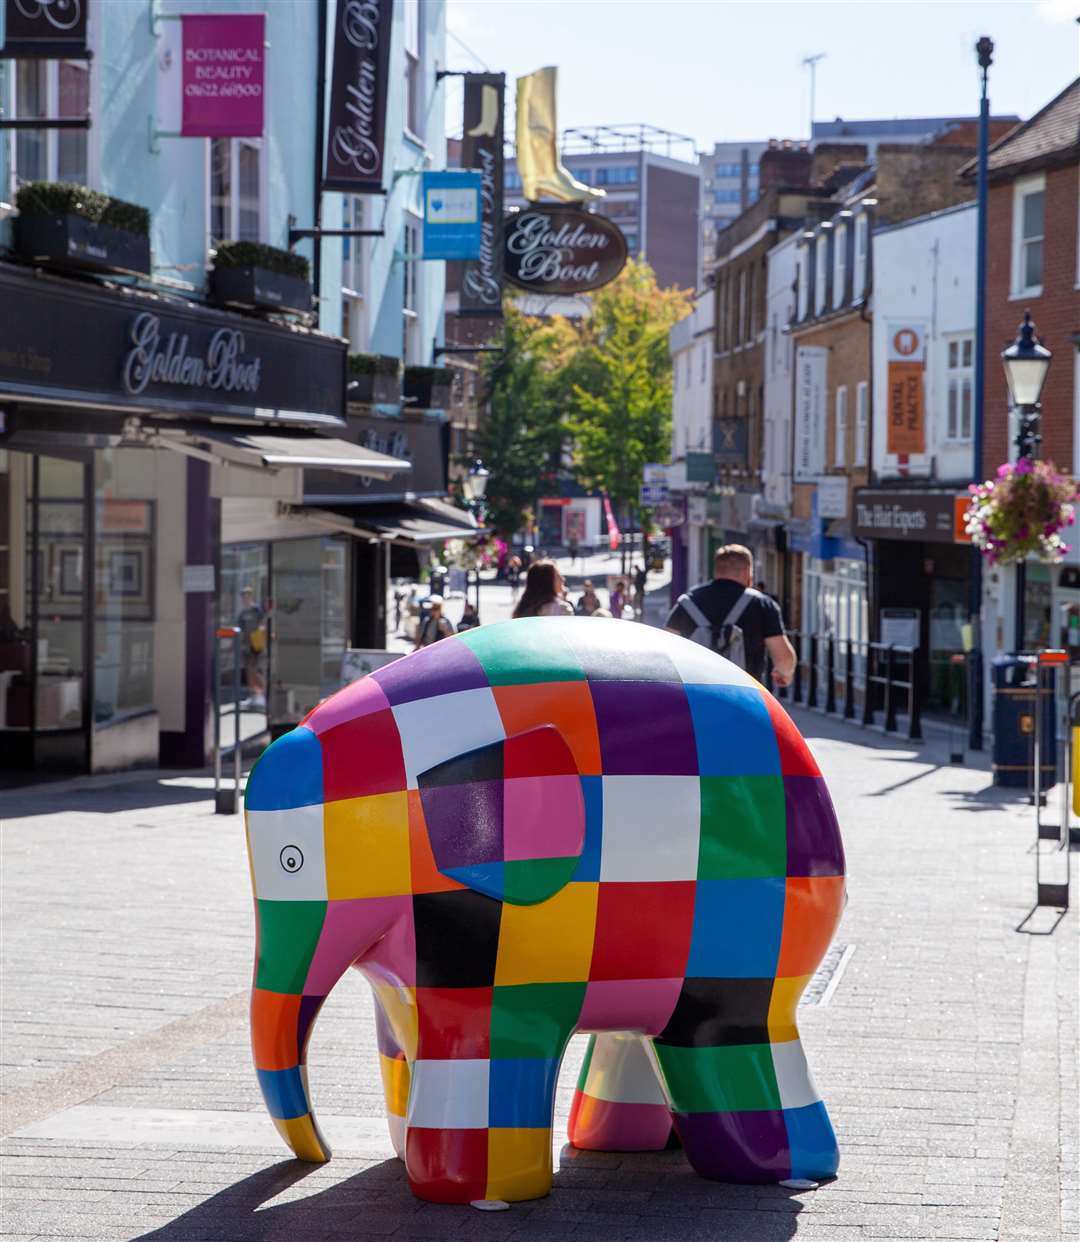 Elmer the elephant is coming to town. Picture: Heart of Kent Hospice